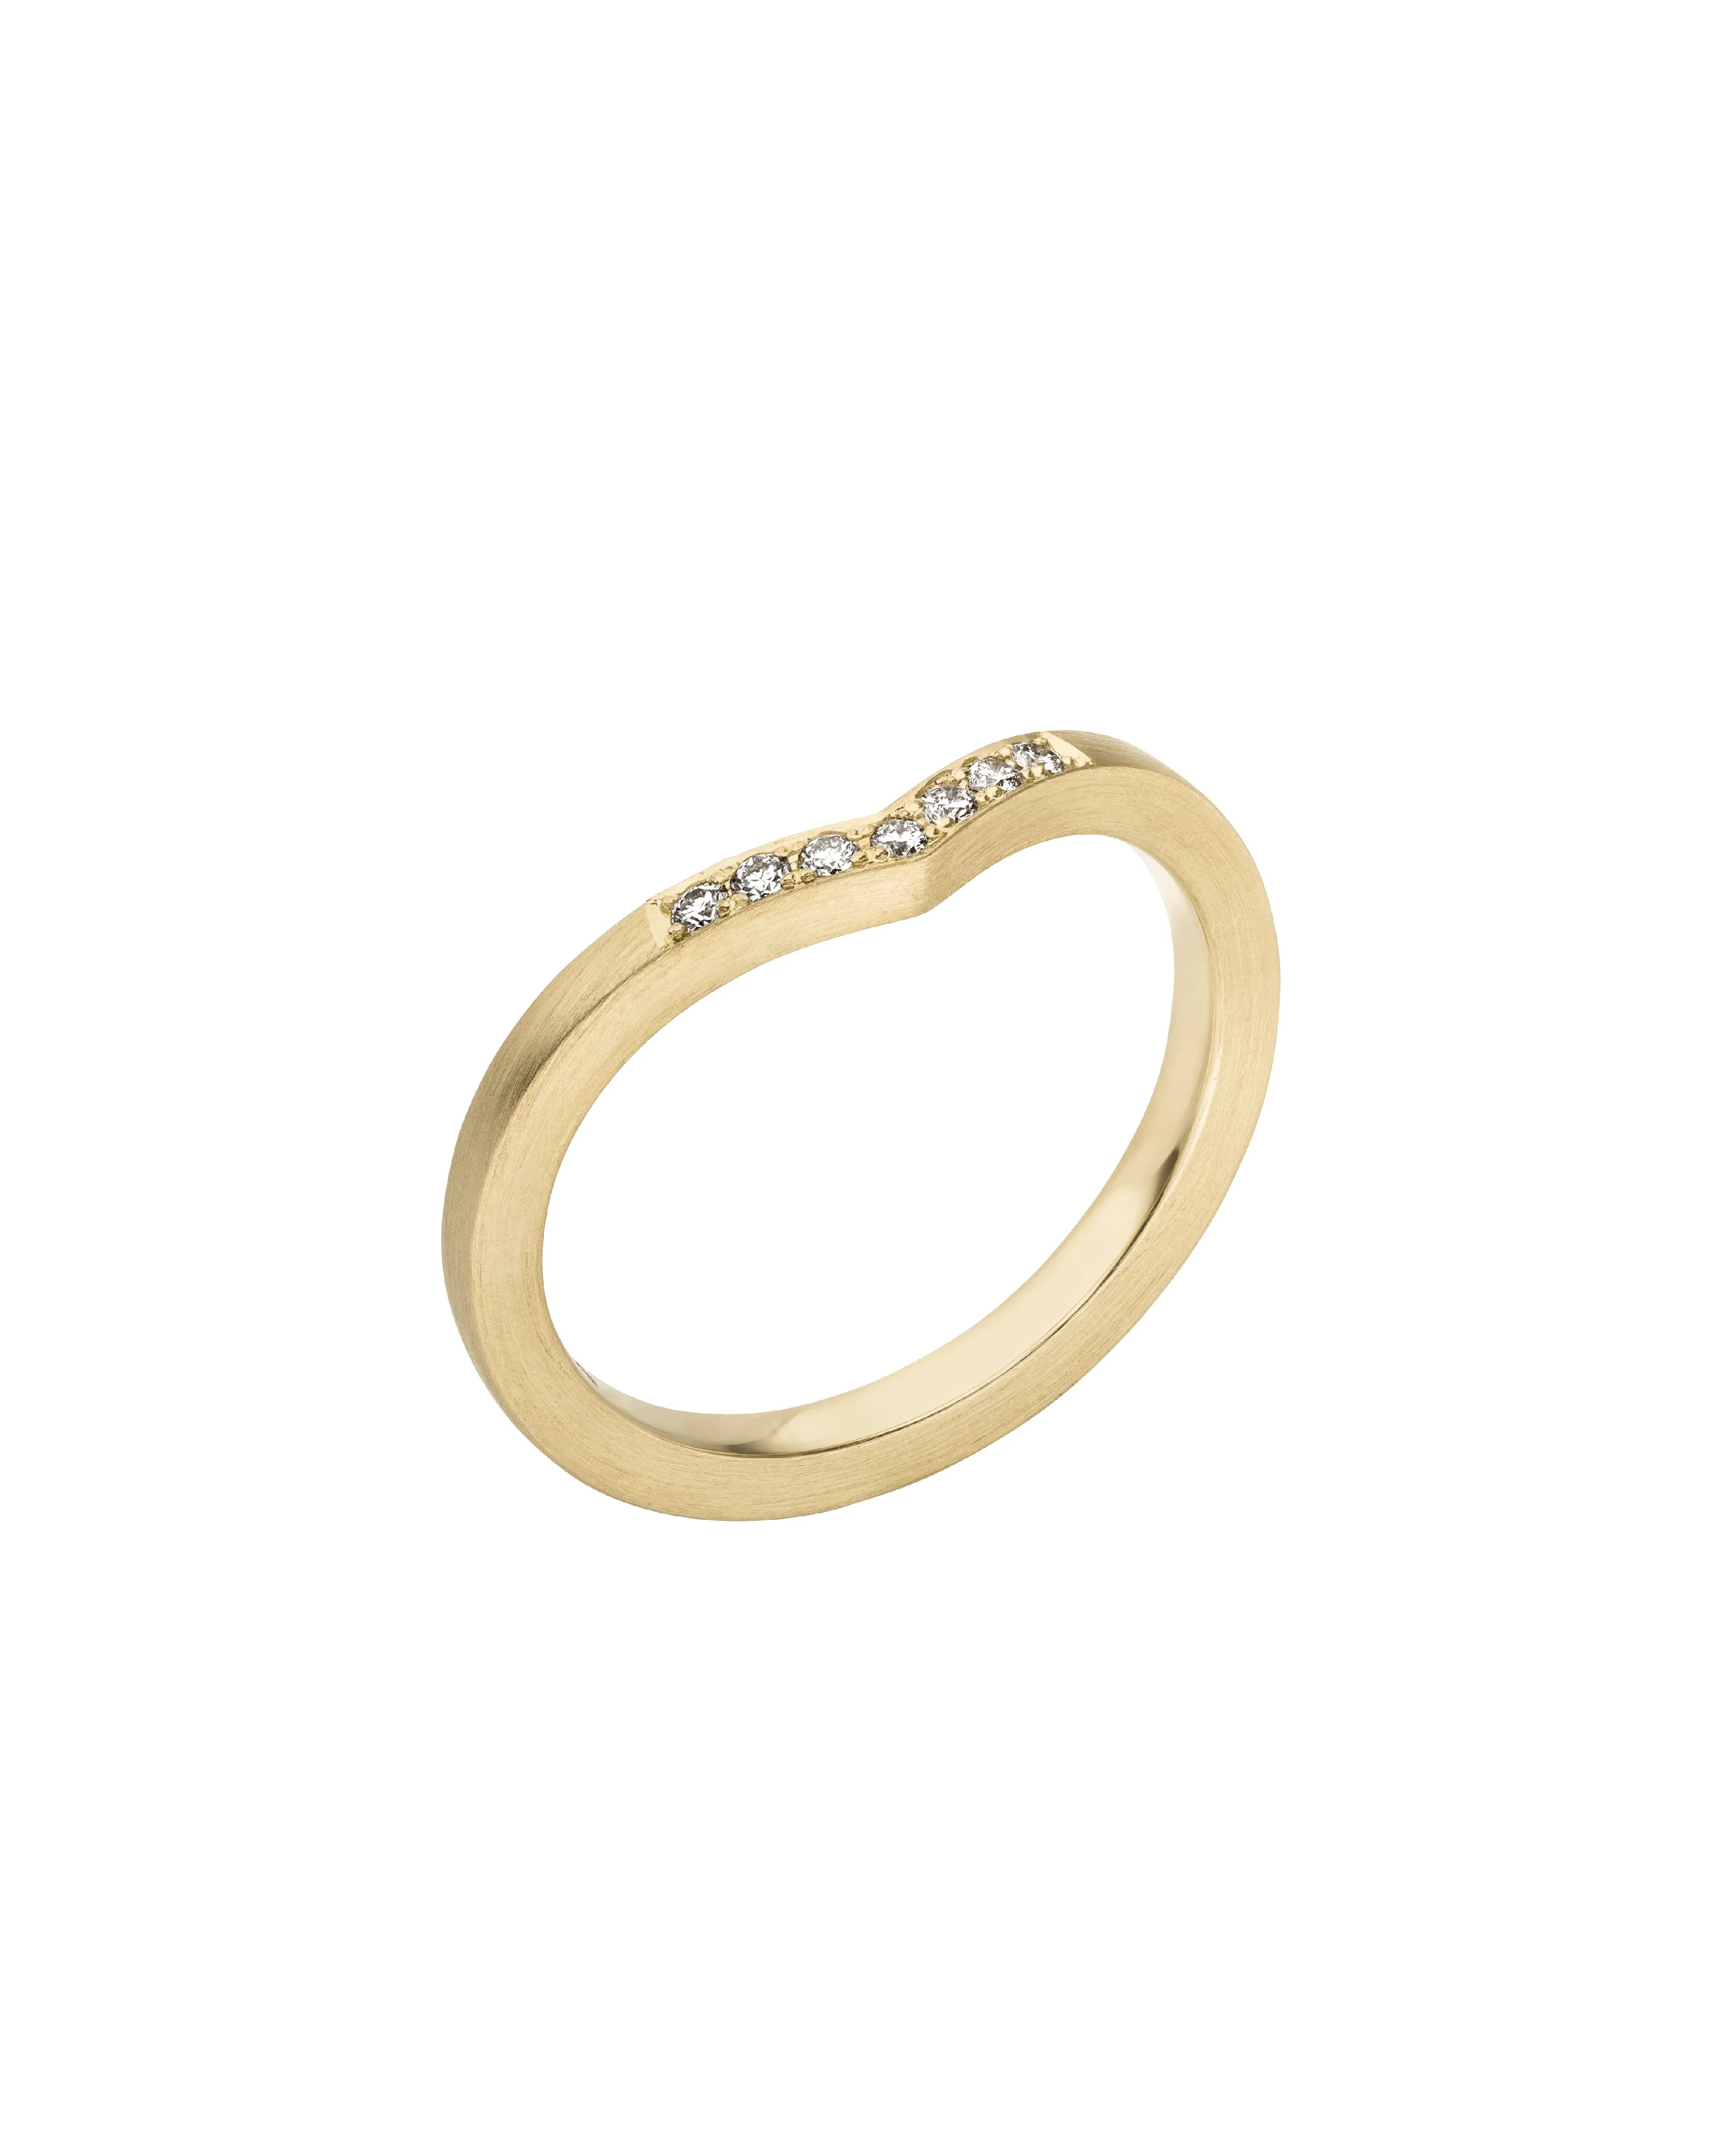 TRIANGLE  - Gold Ring - Gelbgold 585